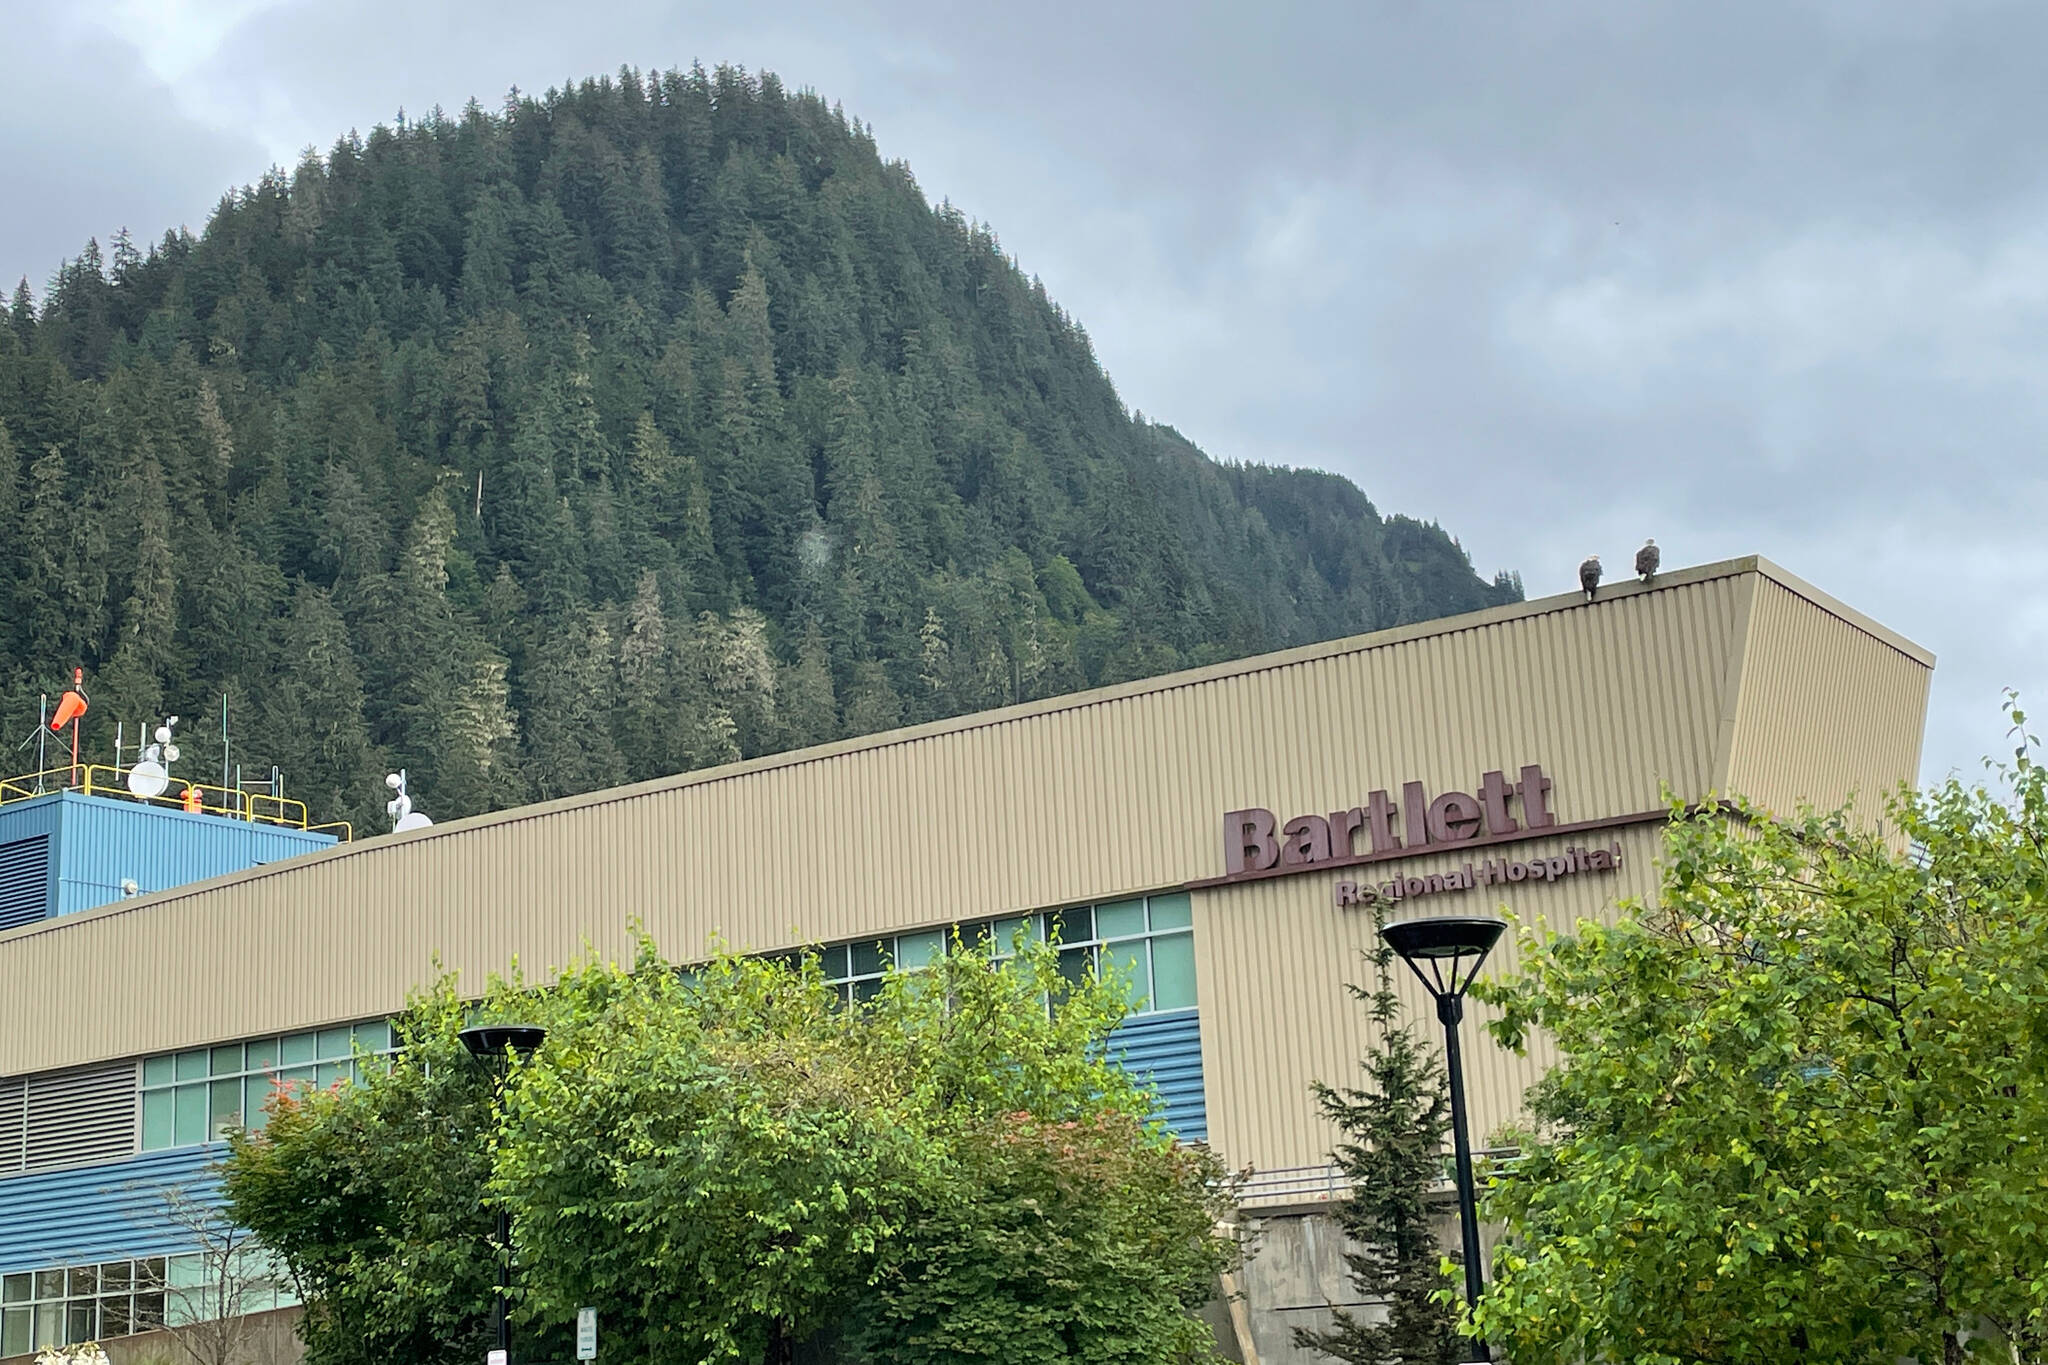 Bartlett Regional Hospital announced that two of three finalists for its chief executive officer position have withdrawn from consideration citing personal reasons. (Michael S. Lockett / Juneau Empire File)